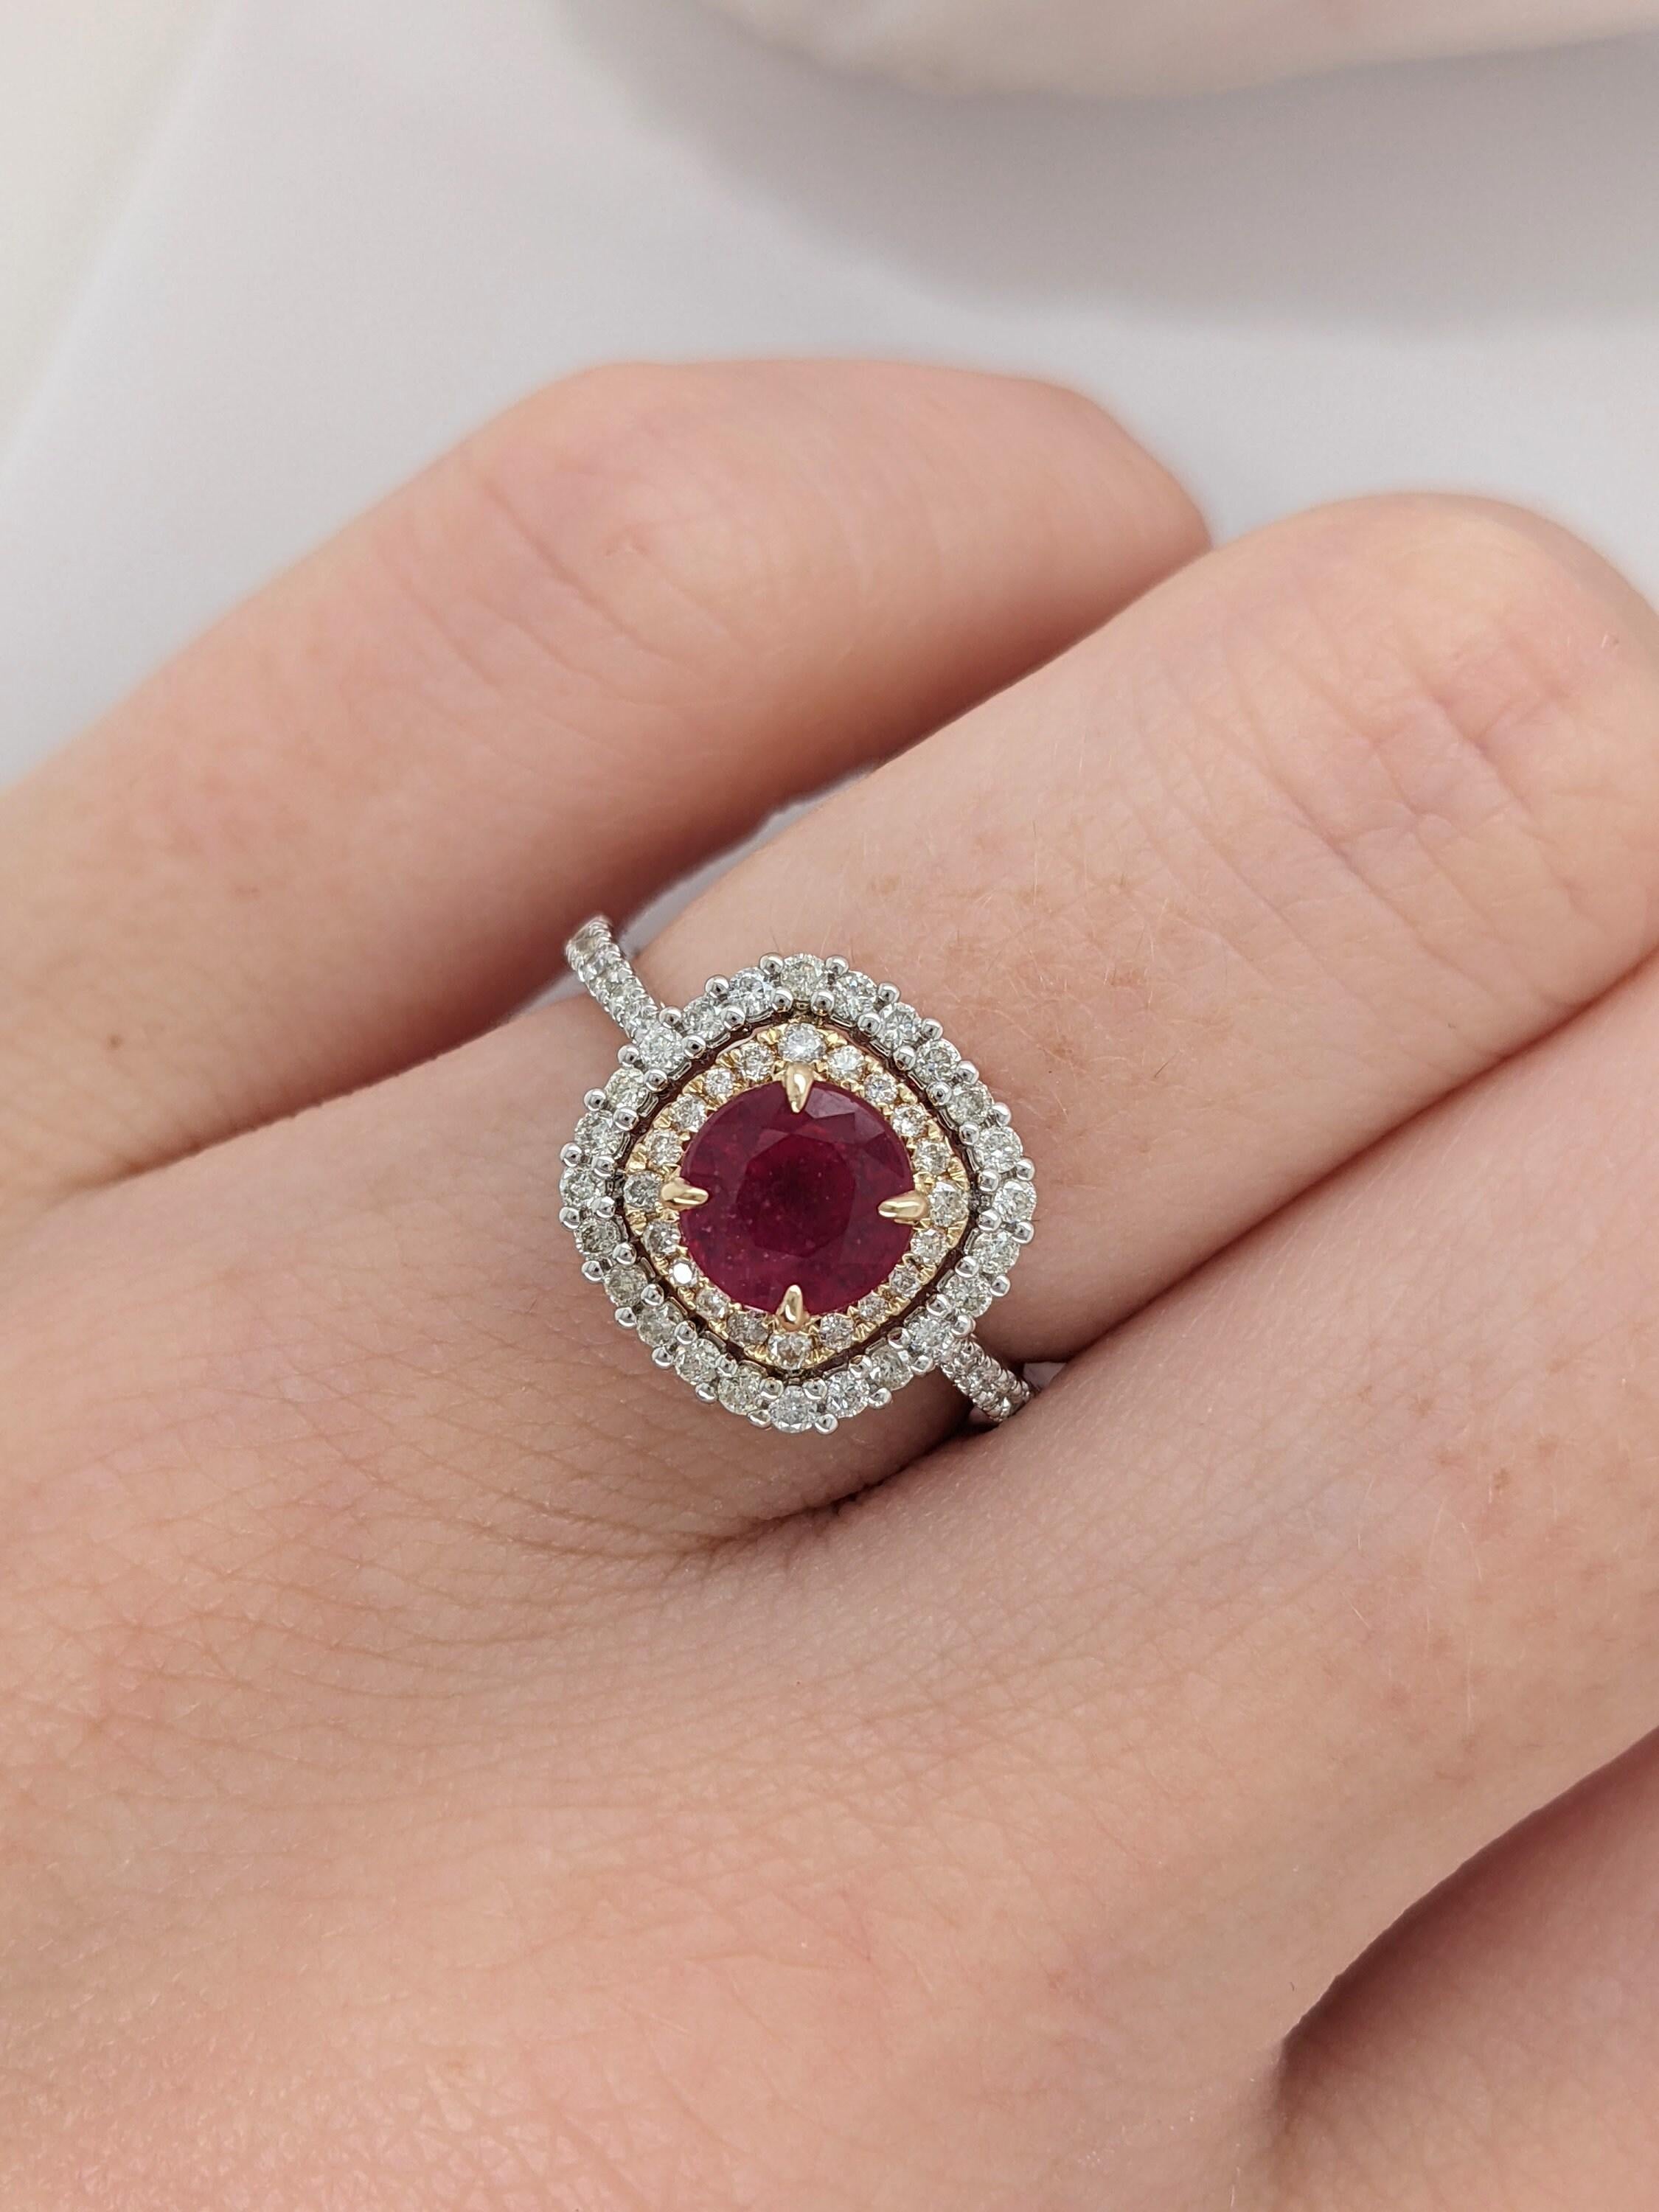 Beautiful Ruby Ring w Earth Mined Diamonds in Solid 14K White Gold Round 6mm